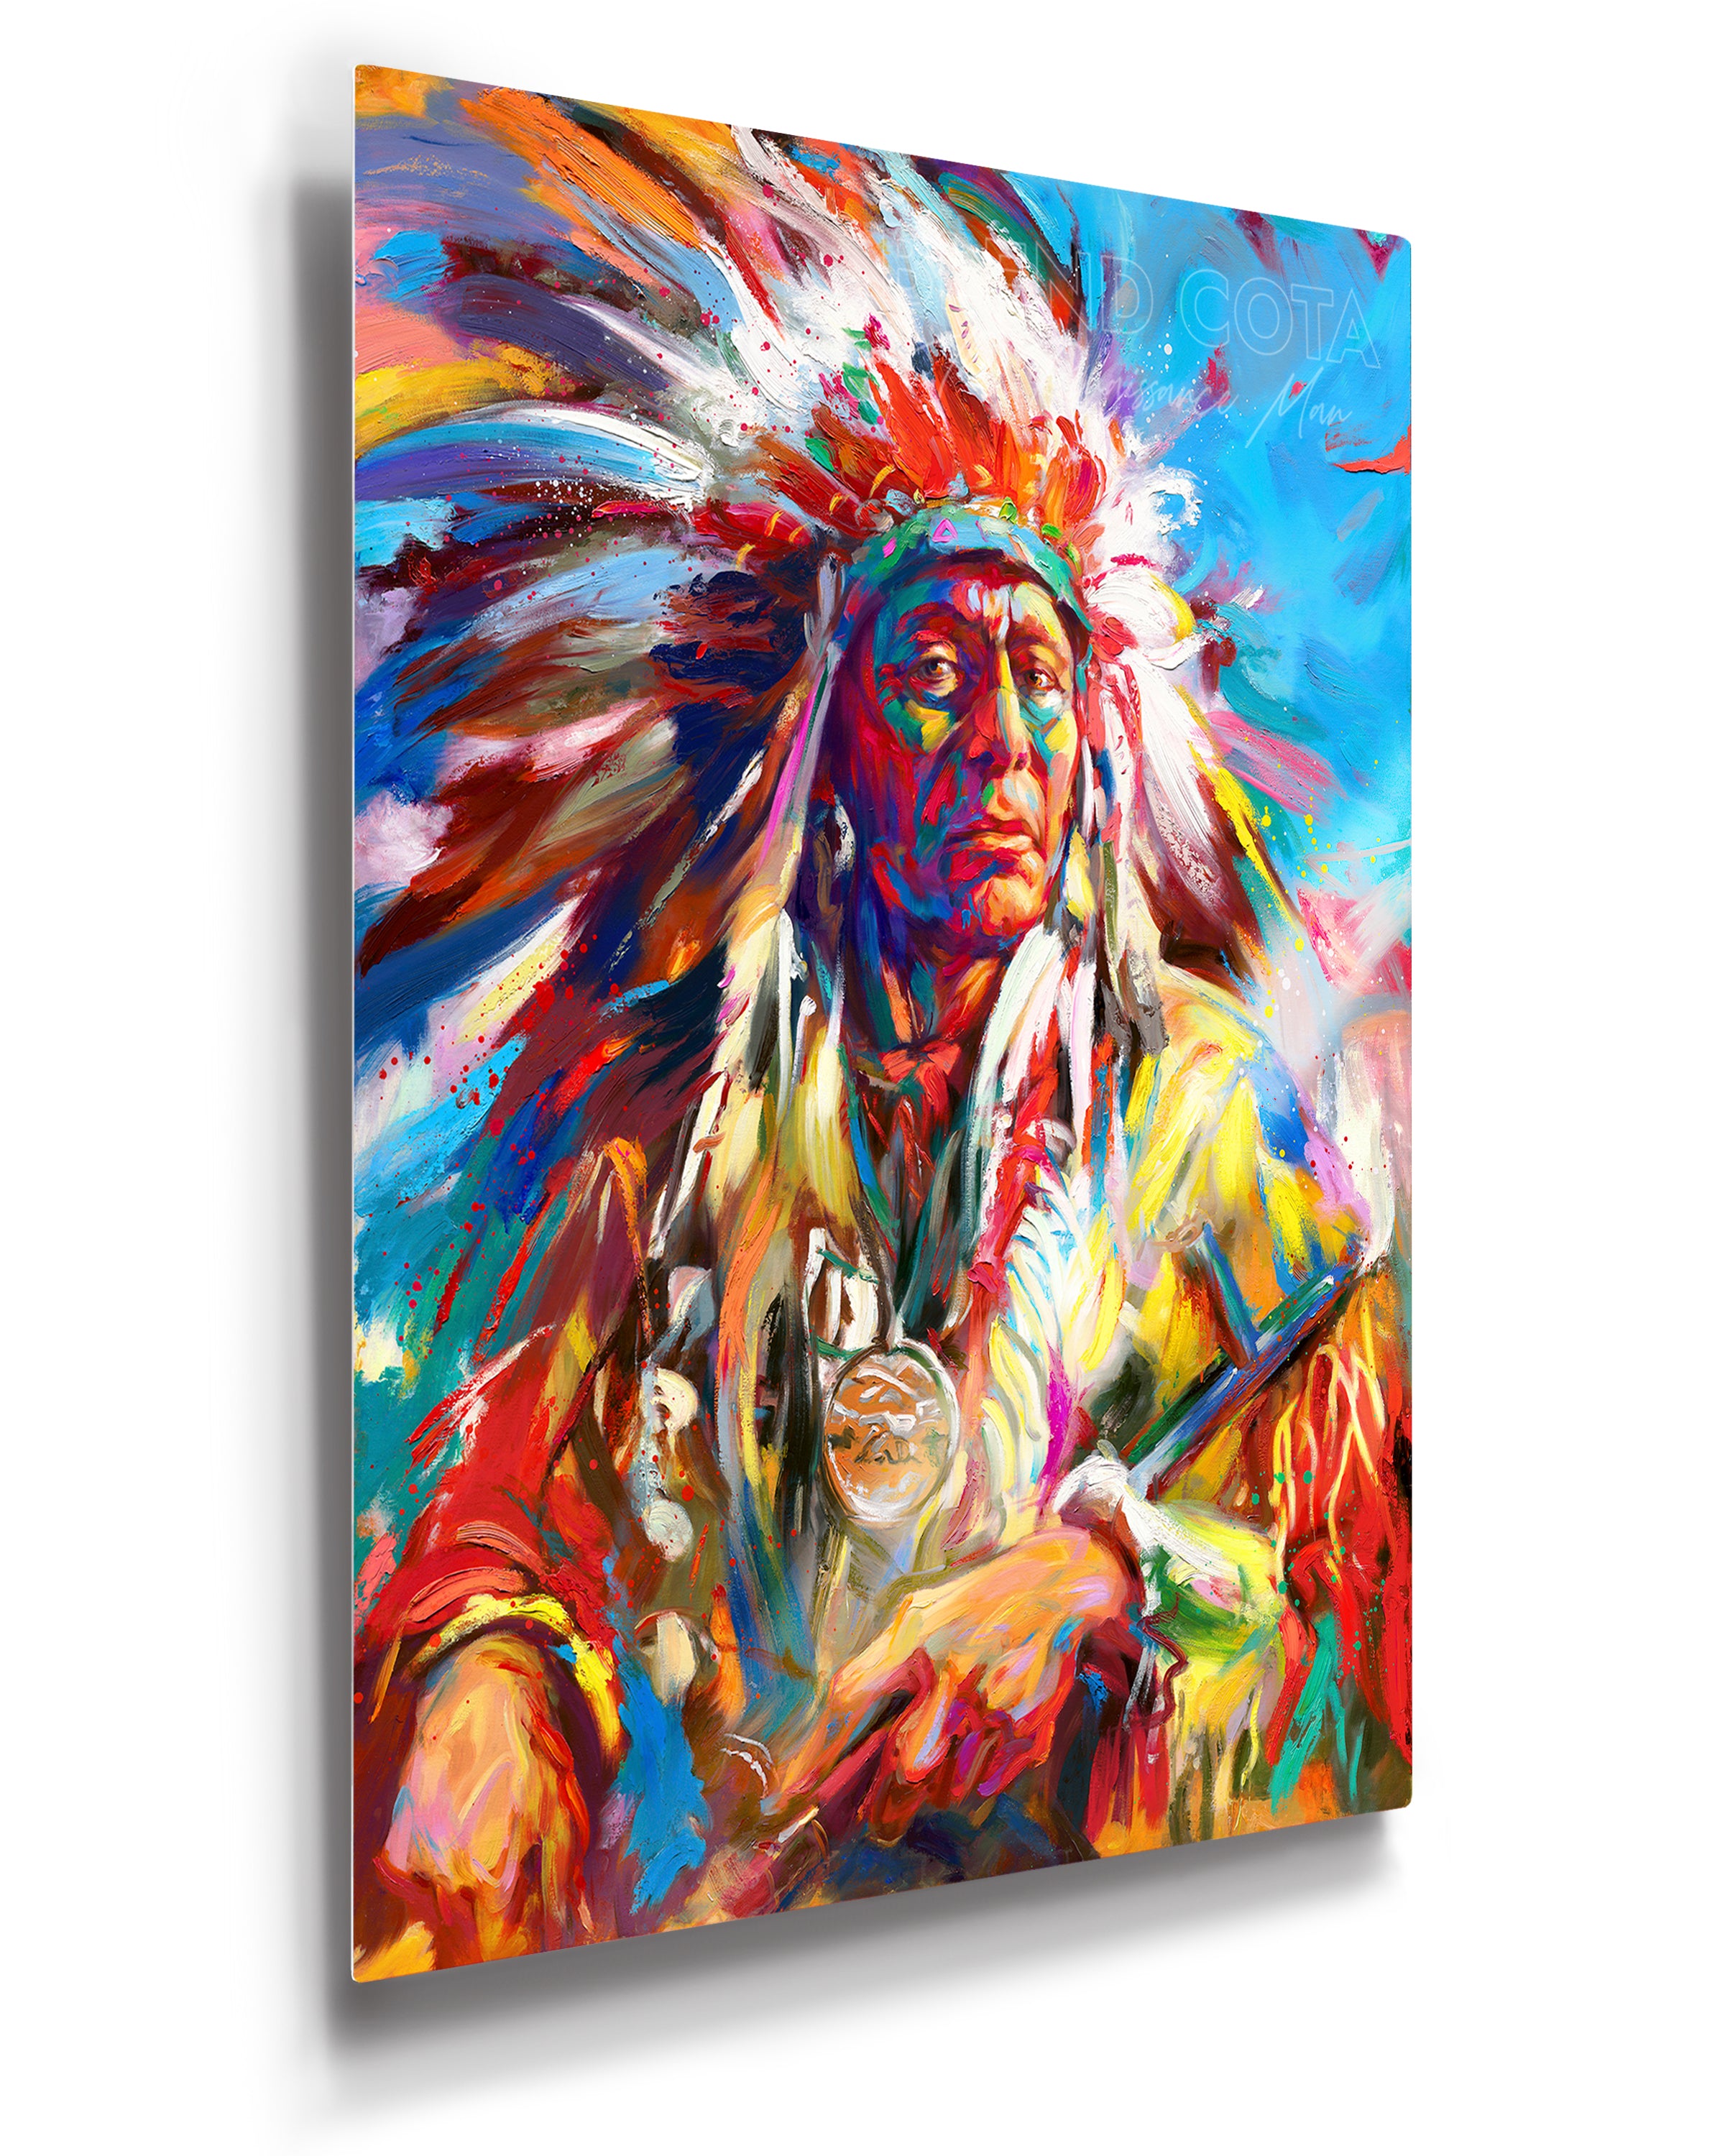 Limited edition on metal of the Native American Warrior Portrait in war bonnet, symoblizing the Great Spirit, pride and power, in colorful brushstrokes, color expressionism style.